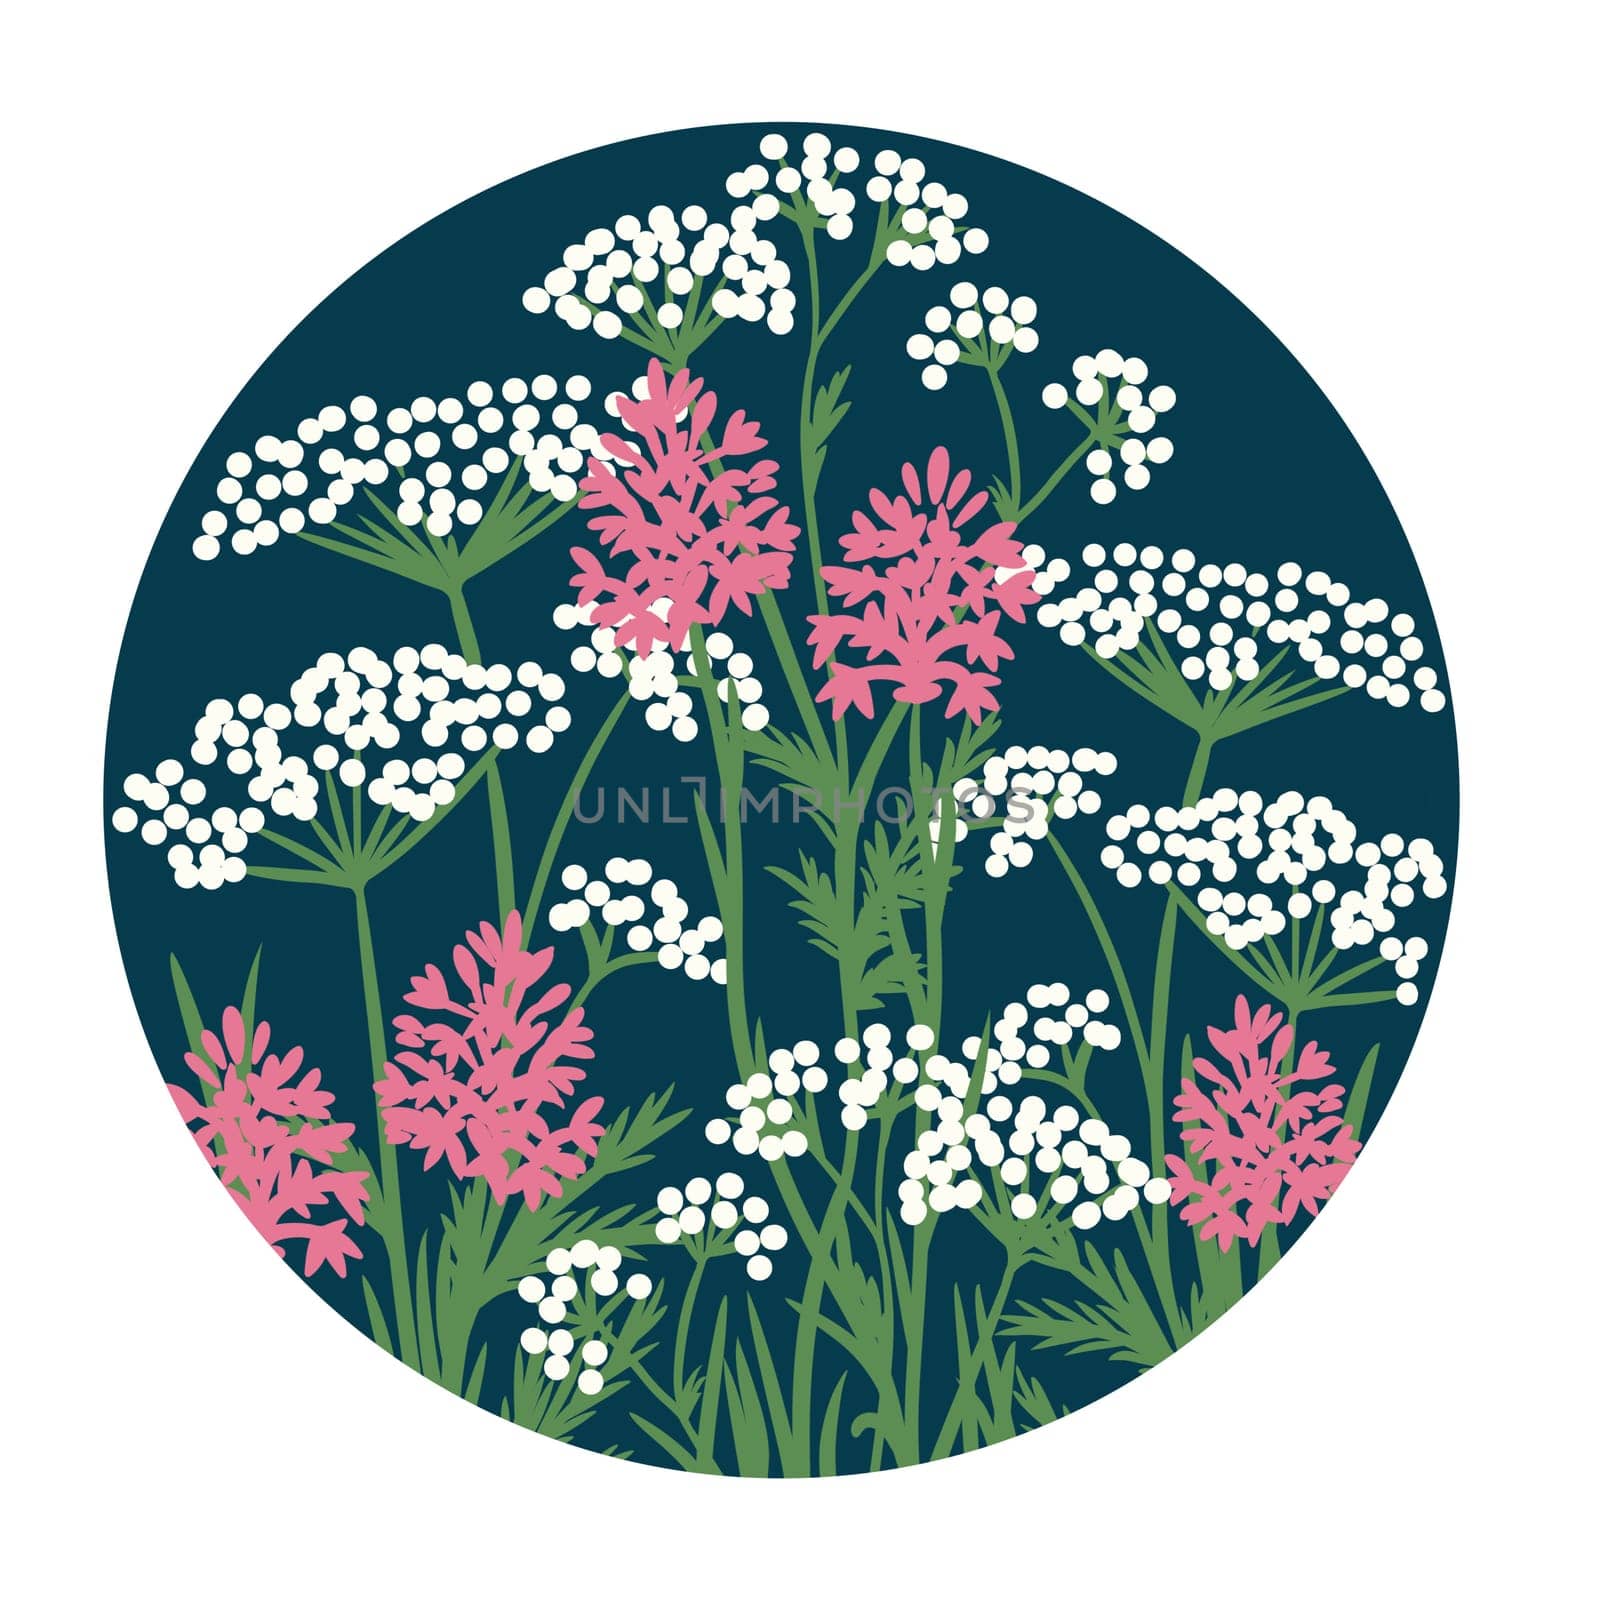 Hand drawn illustration of white cow parsley pink pyramidal orchid meadow wild flowers, wildflower floral design. Round circle nature plant on dark blue navy indigo background, british common herbs grass